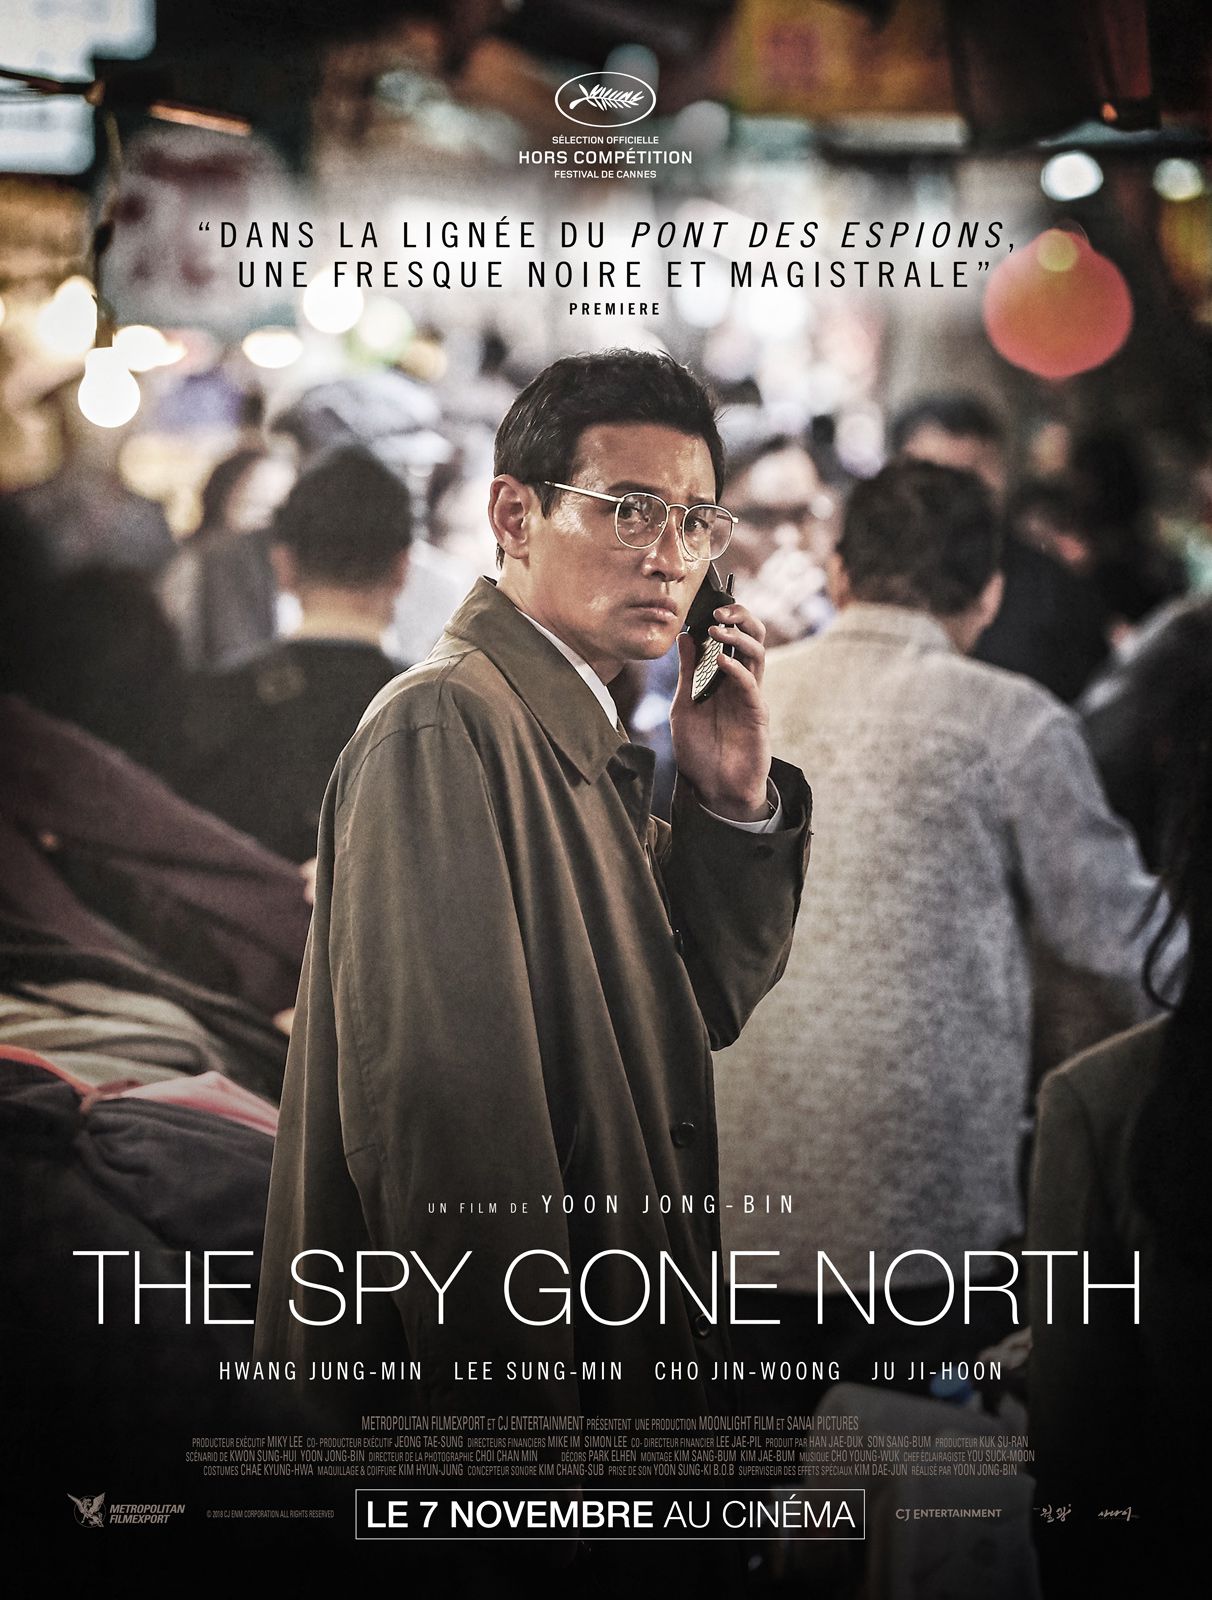 The Spy Gone North - Film (2018) streaming VF gratuit complet